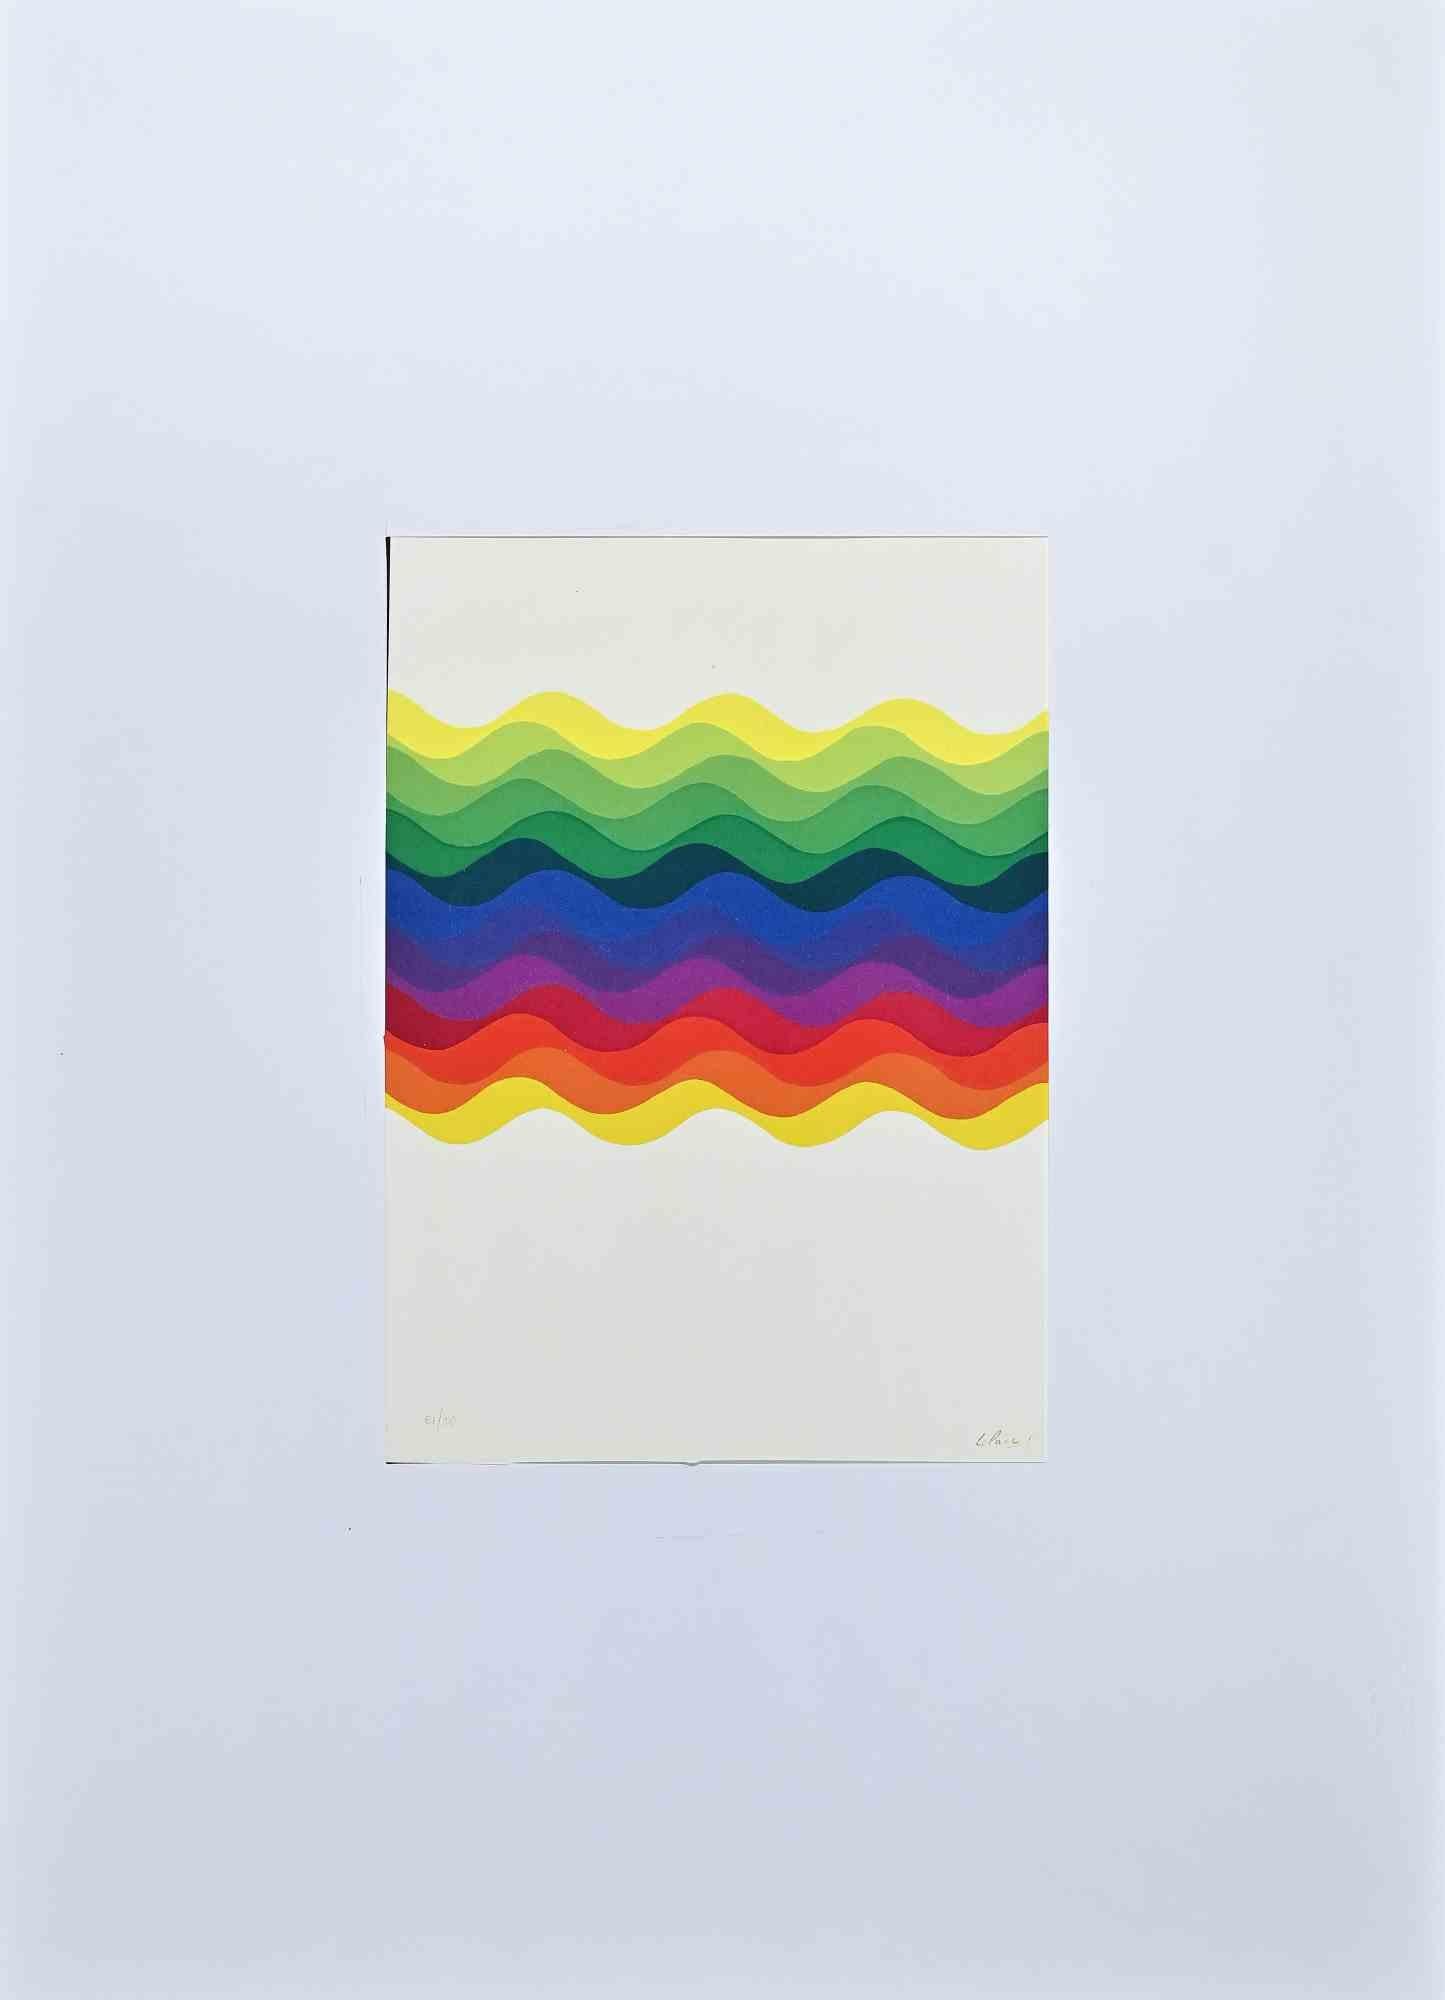 Untitled is a colored screen print realized in  1977  by the Argentinian artist Julio Le Parc .

Hand-signed  in pencil by the artist on the lower right. Numbered on the lower left.

Edition 61/100.

On the lower right, the dry stamp from the editor